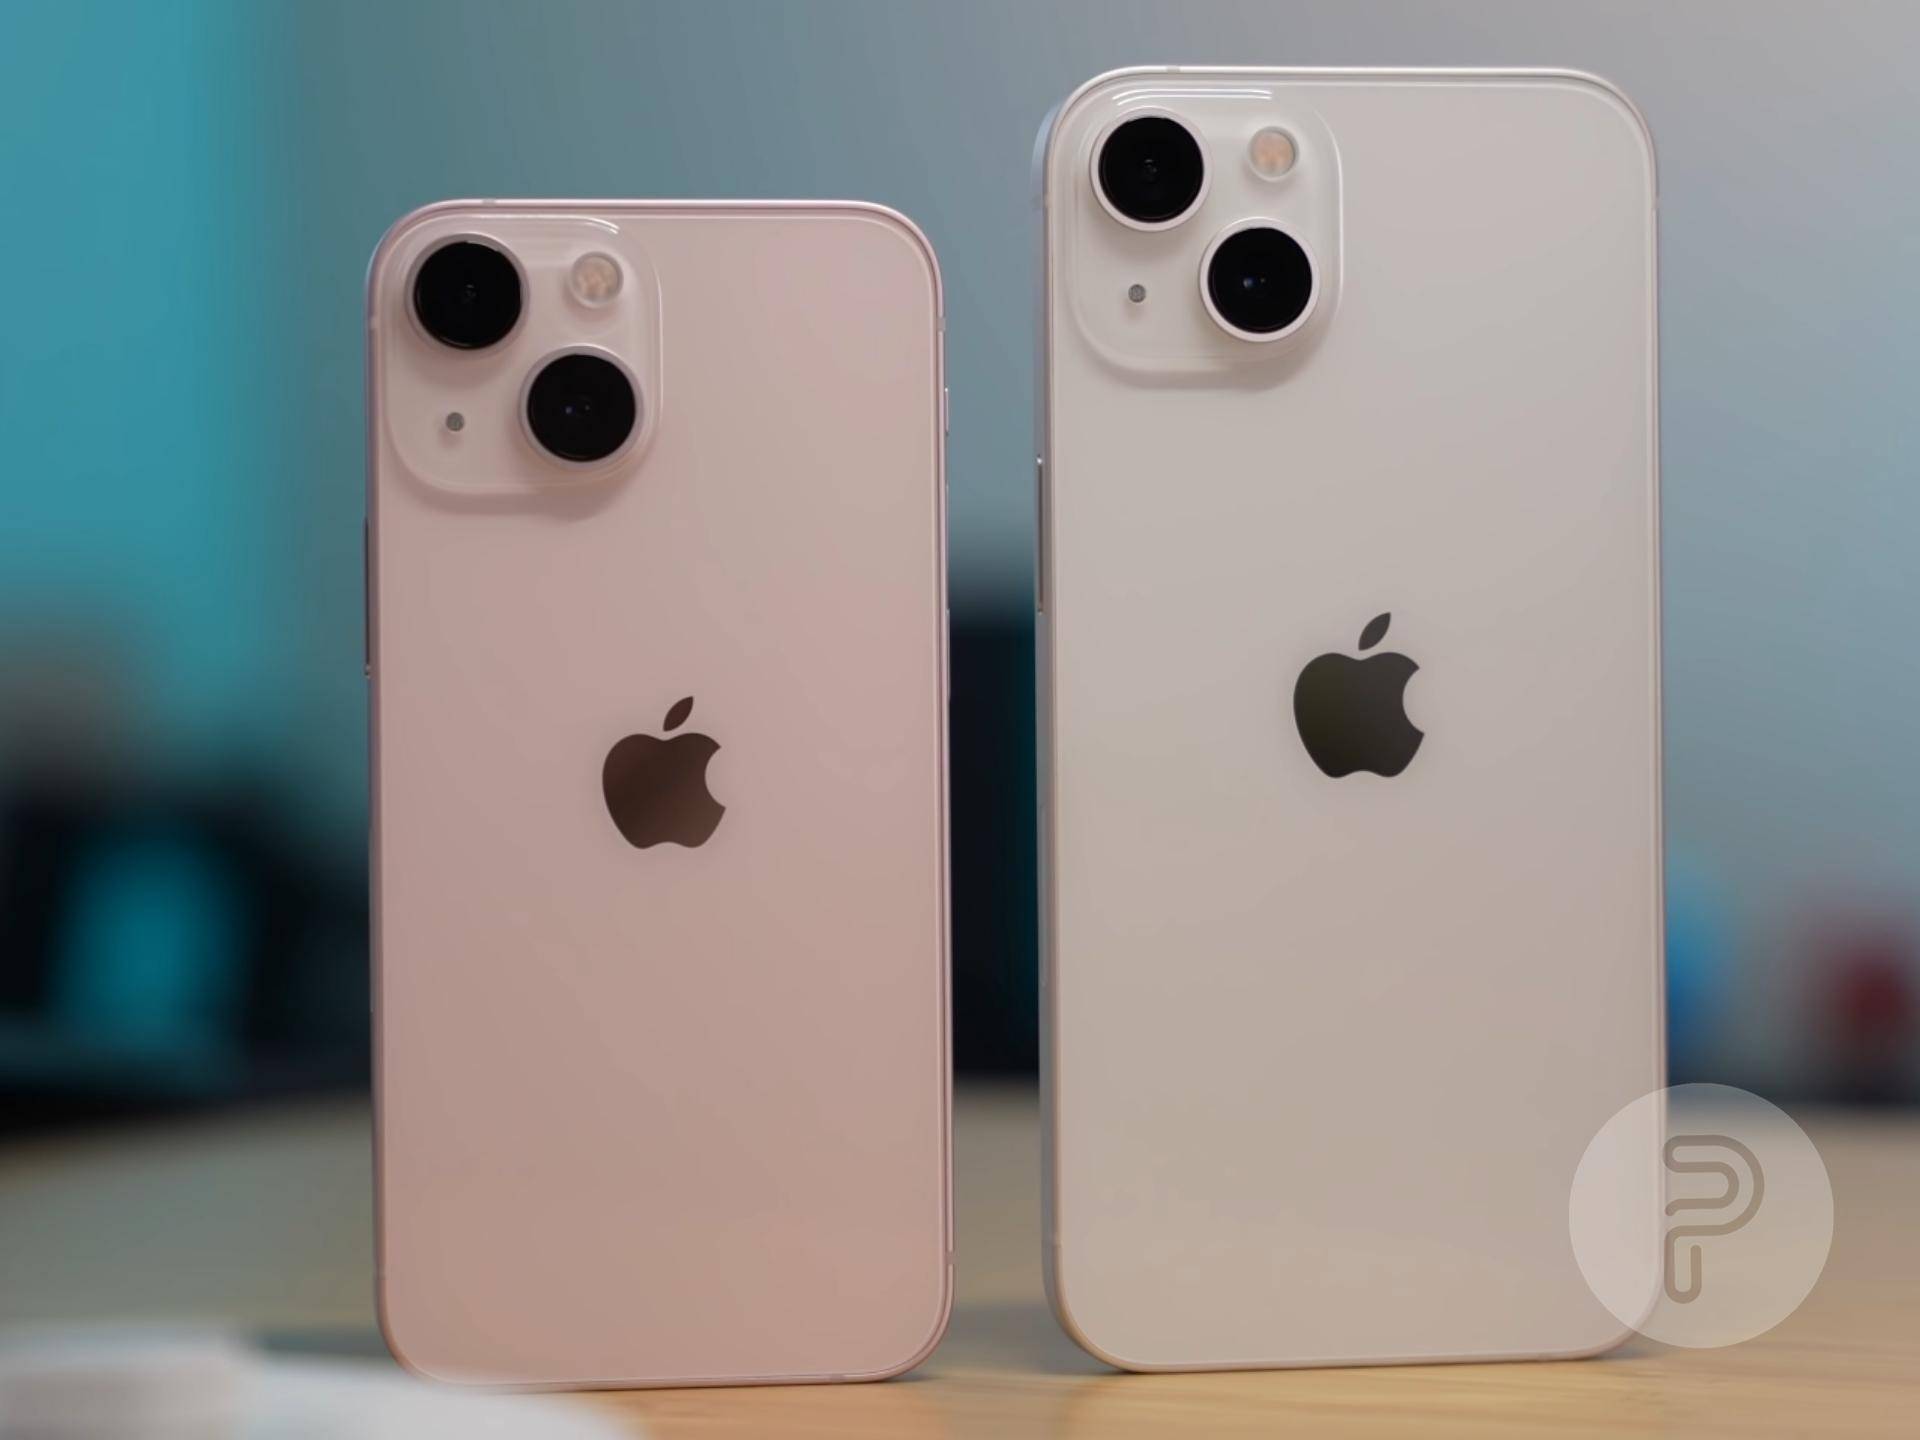 iPhone 13 mini in Pink next to iPhone 13 in White